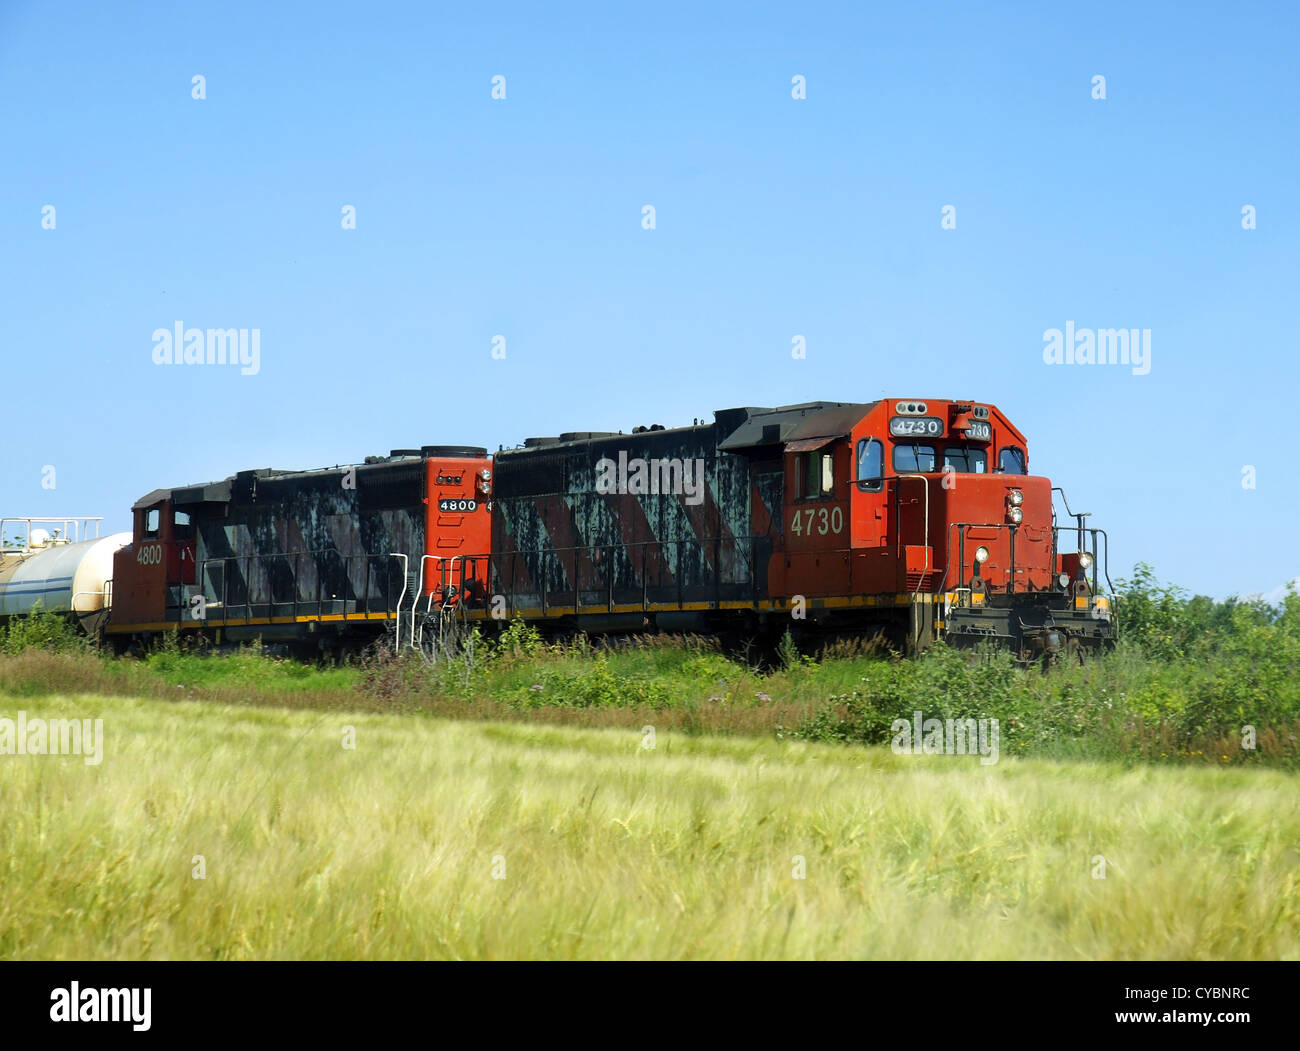 Two old freight or cargo locomotives going through farmland or prairies to deliver products and merchandises. Stock Photo